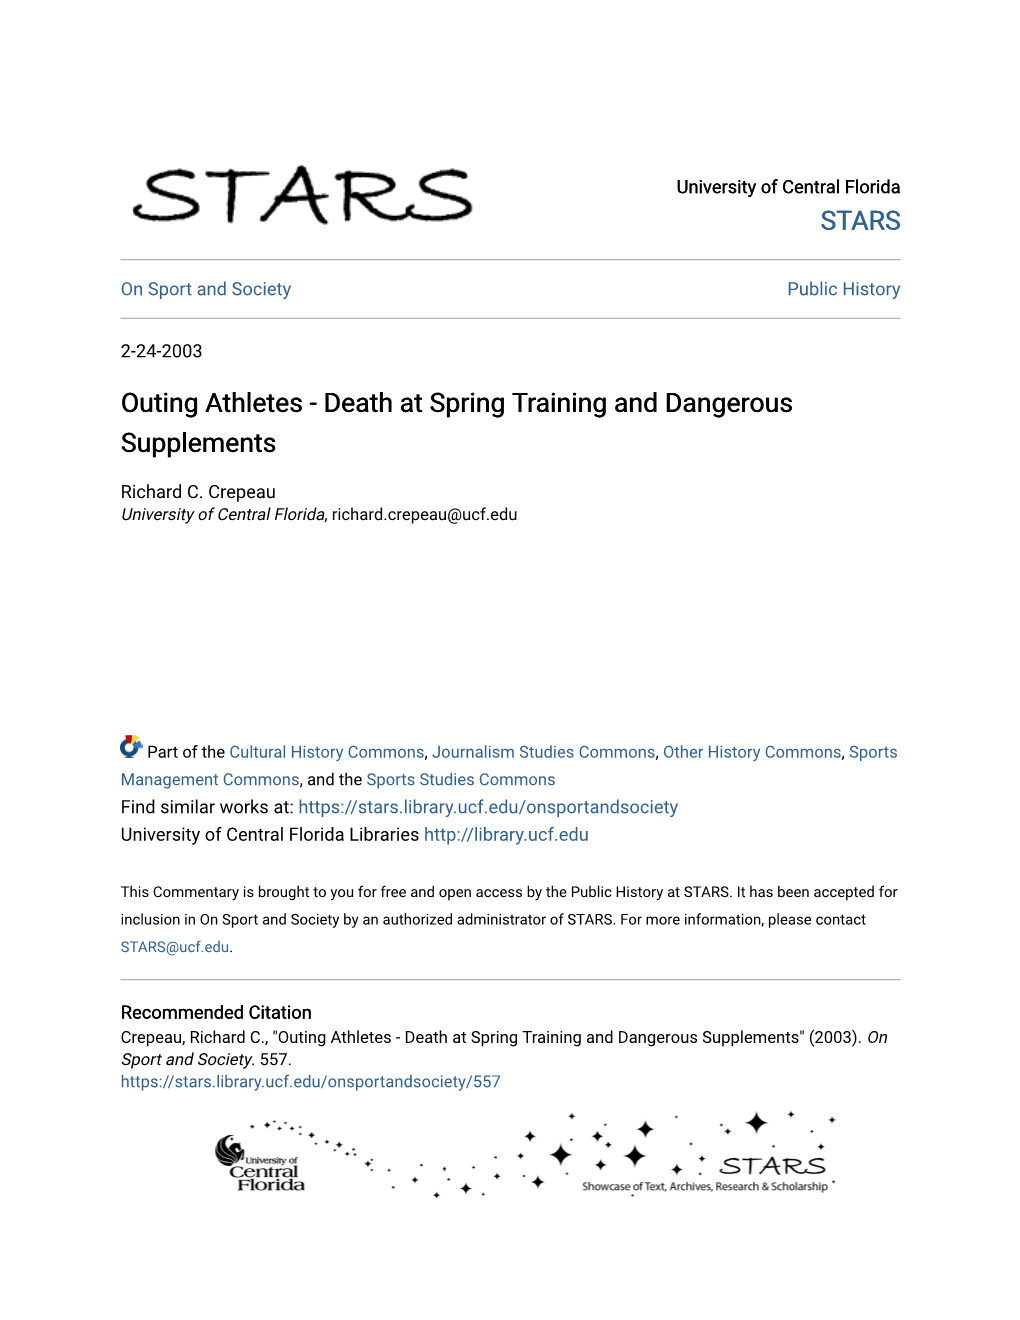 Outing Athletes - Death at Spring Training and Dangerous Supplements